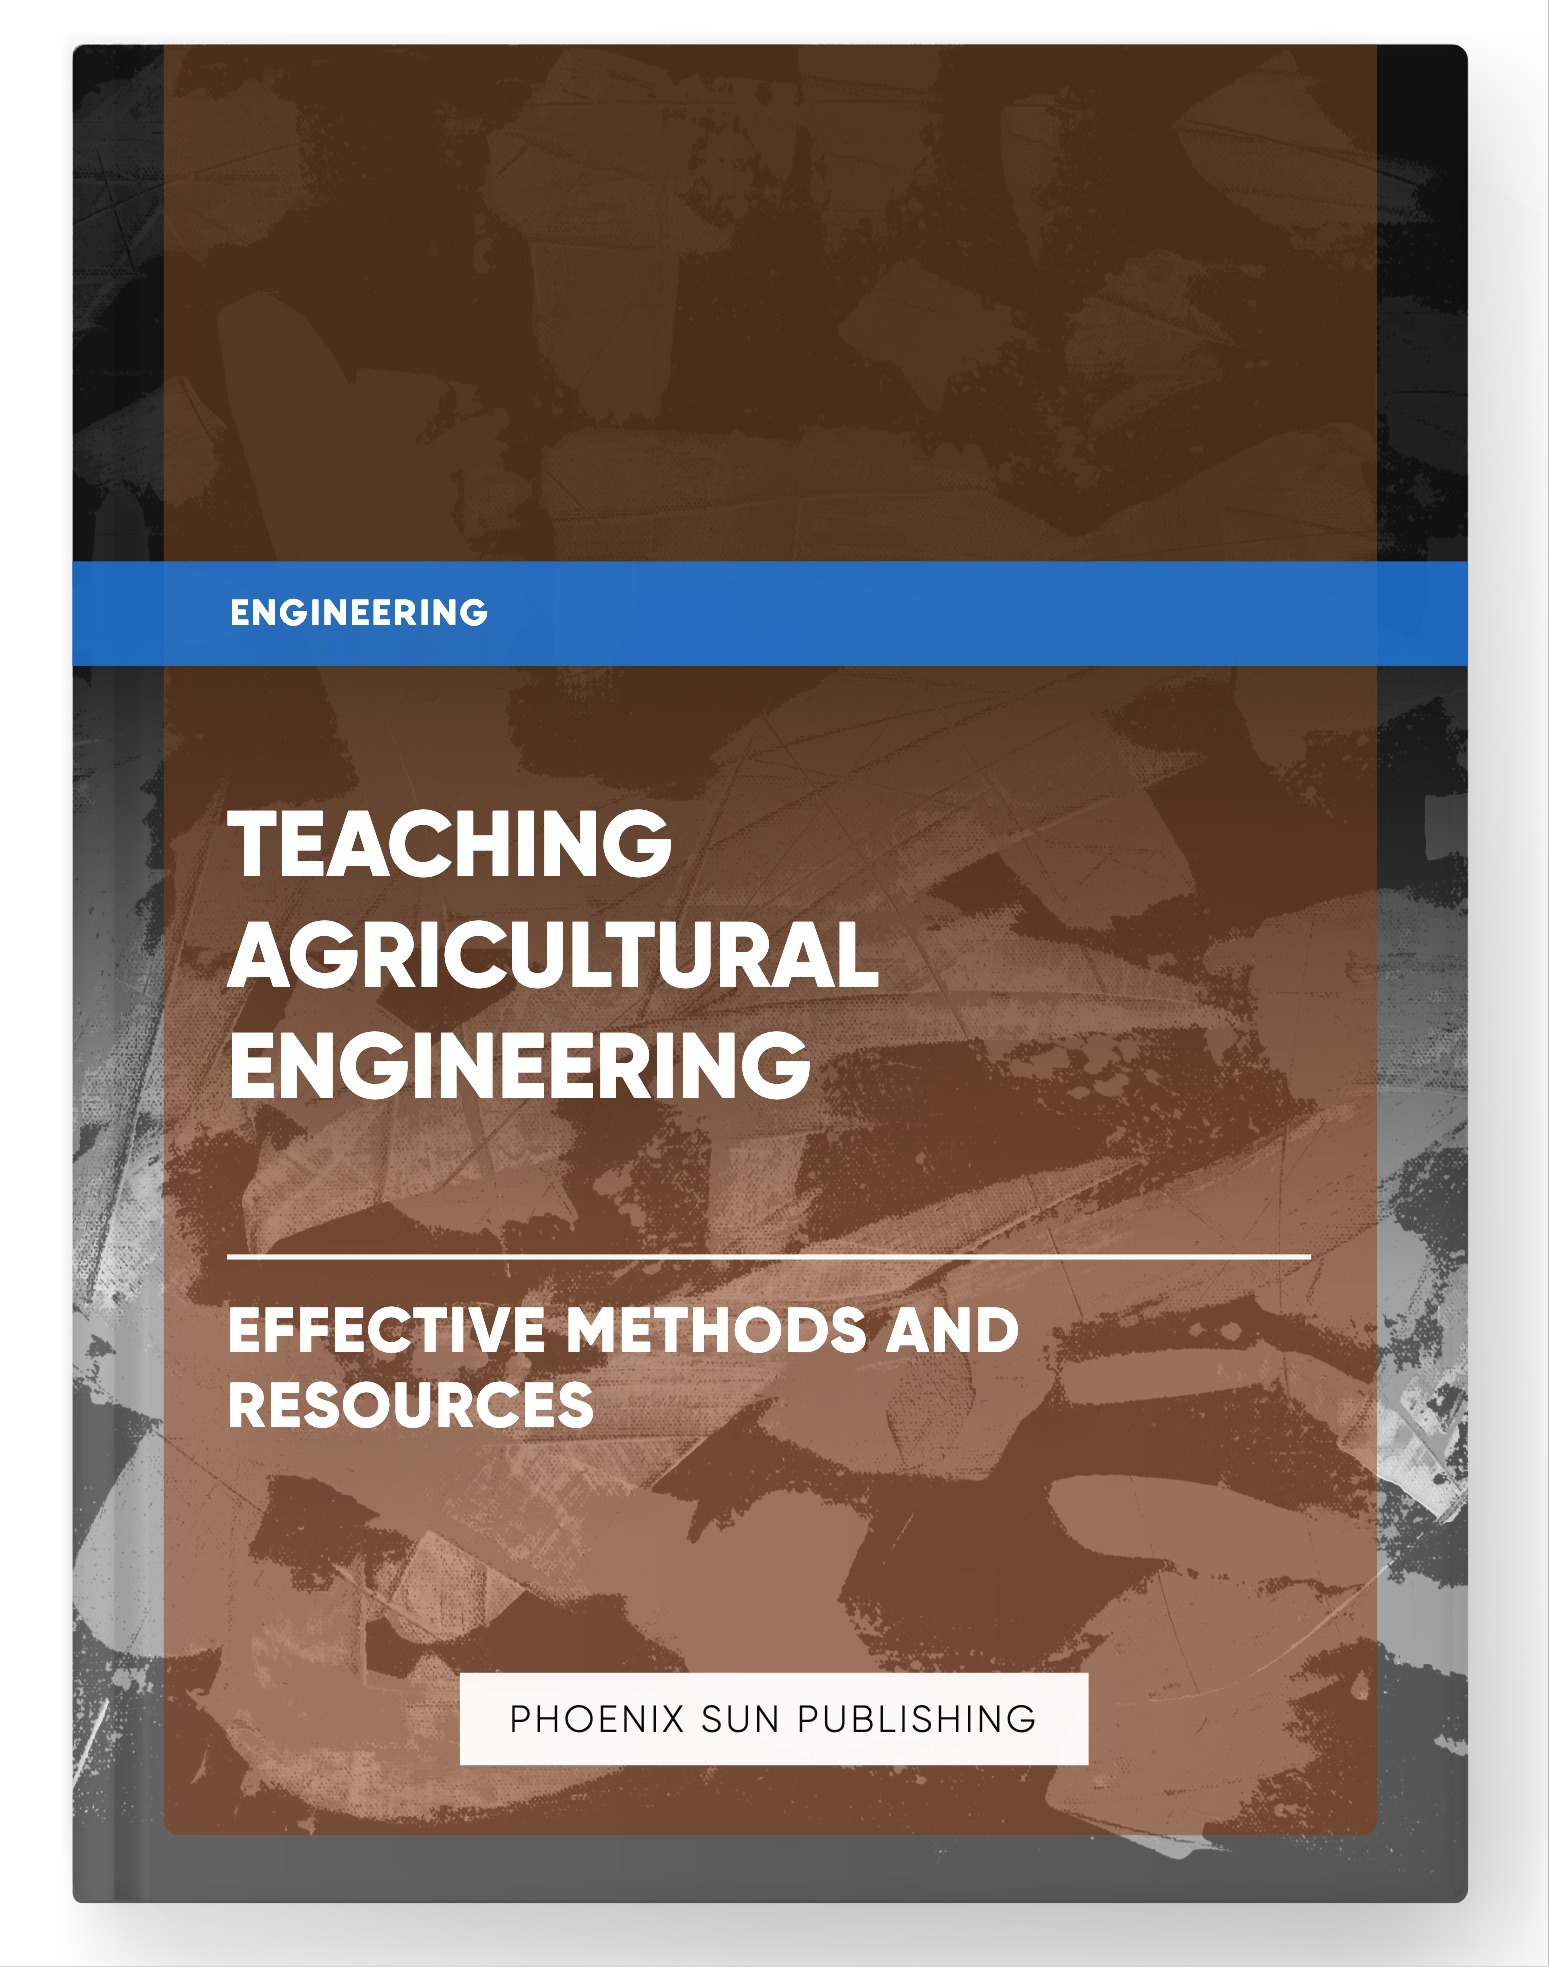 Teaching Agricultural Engineering – Effective Methods and Resources